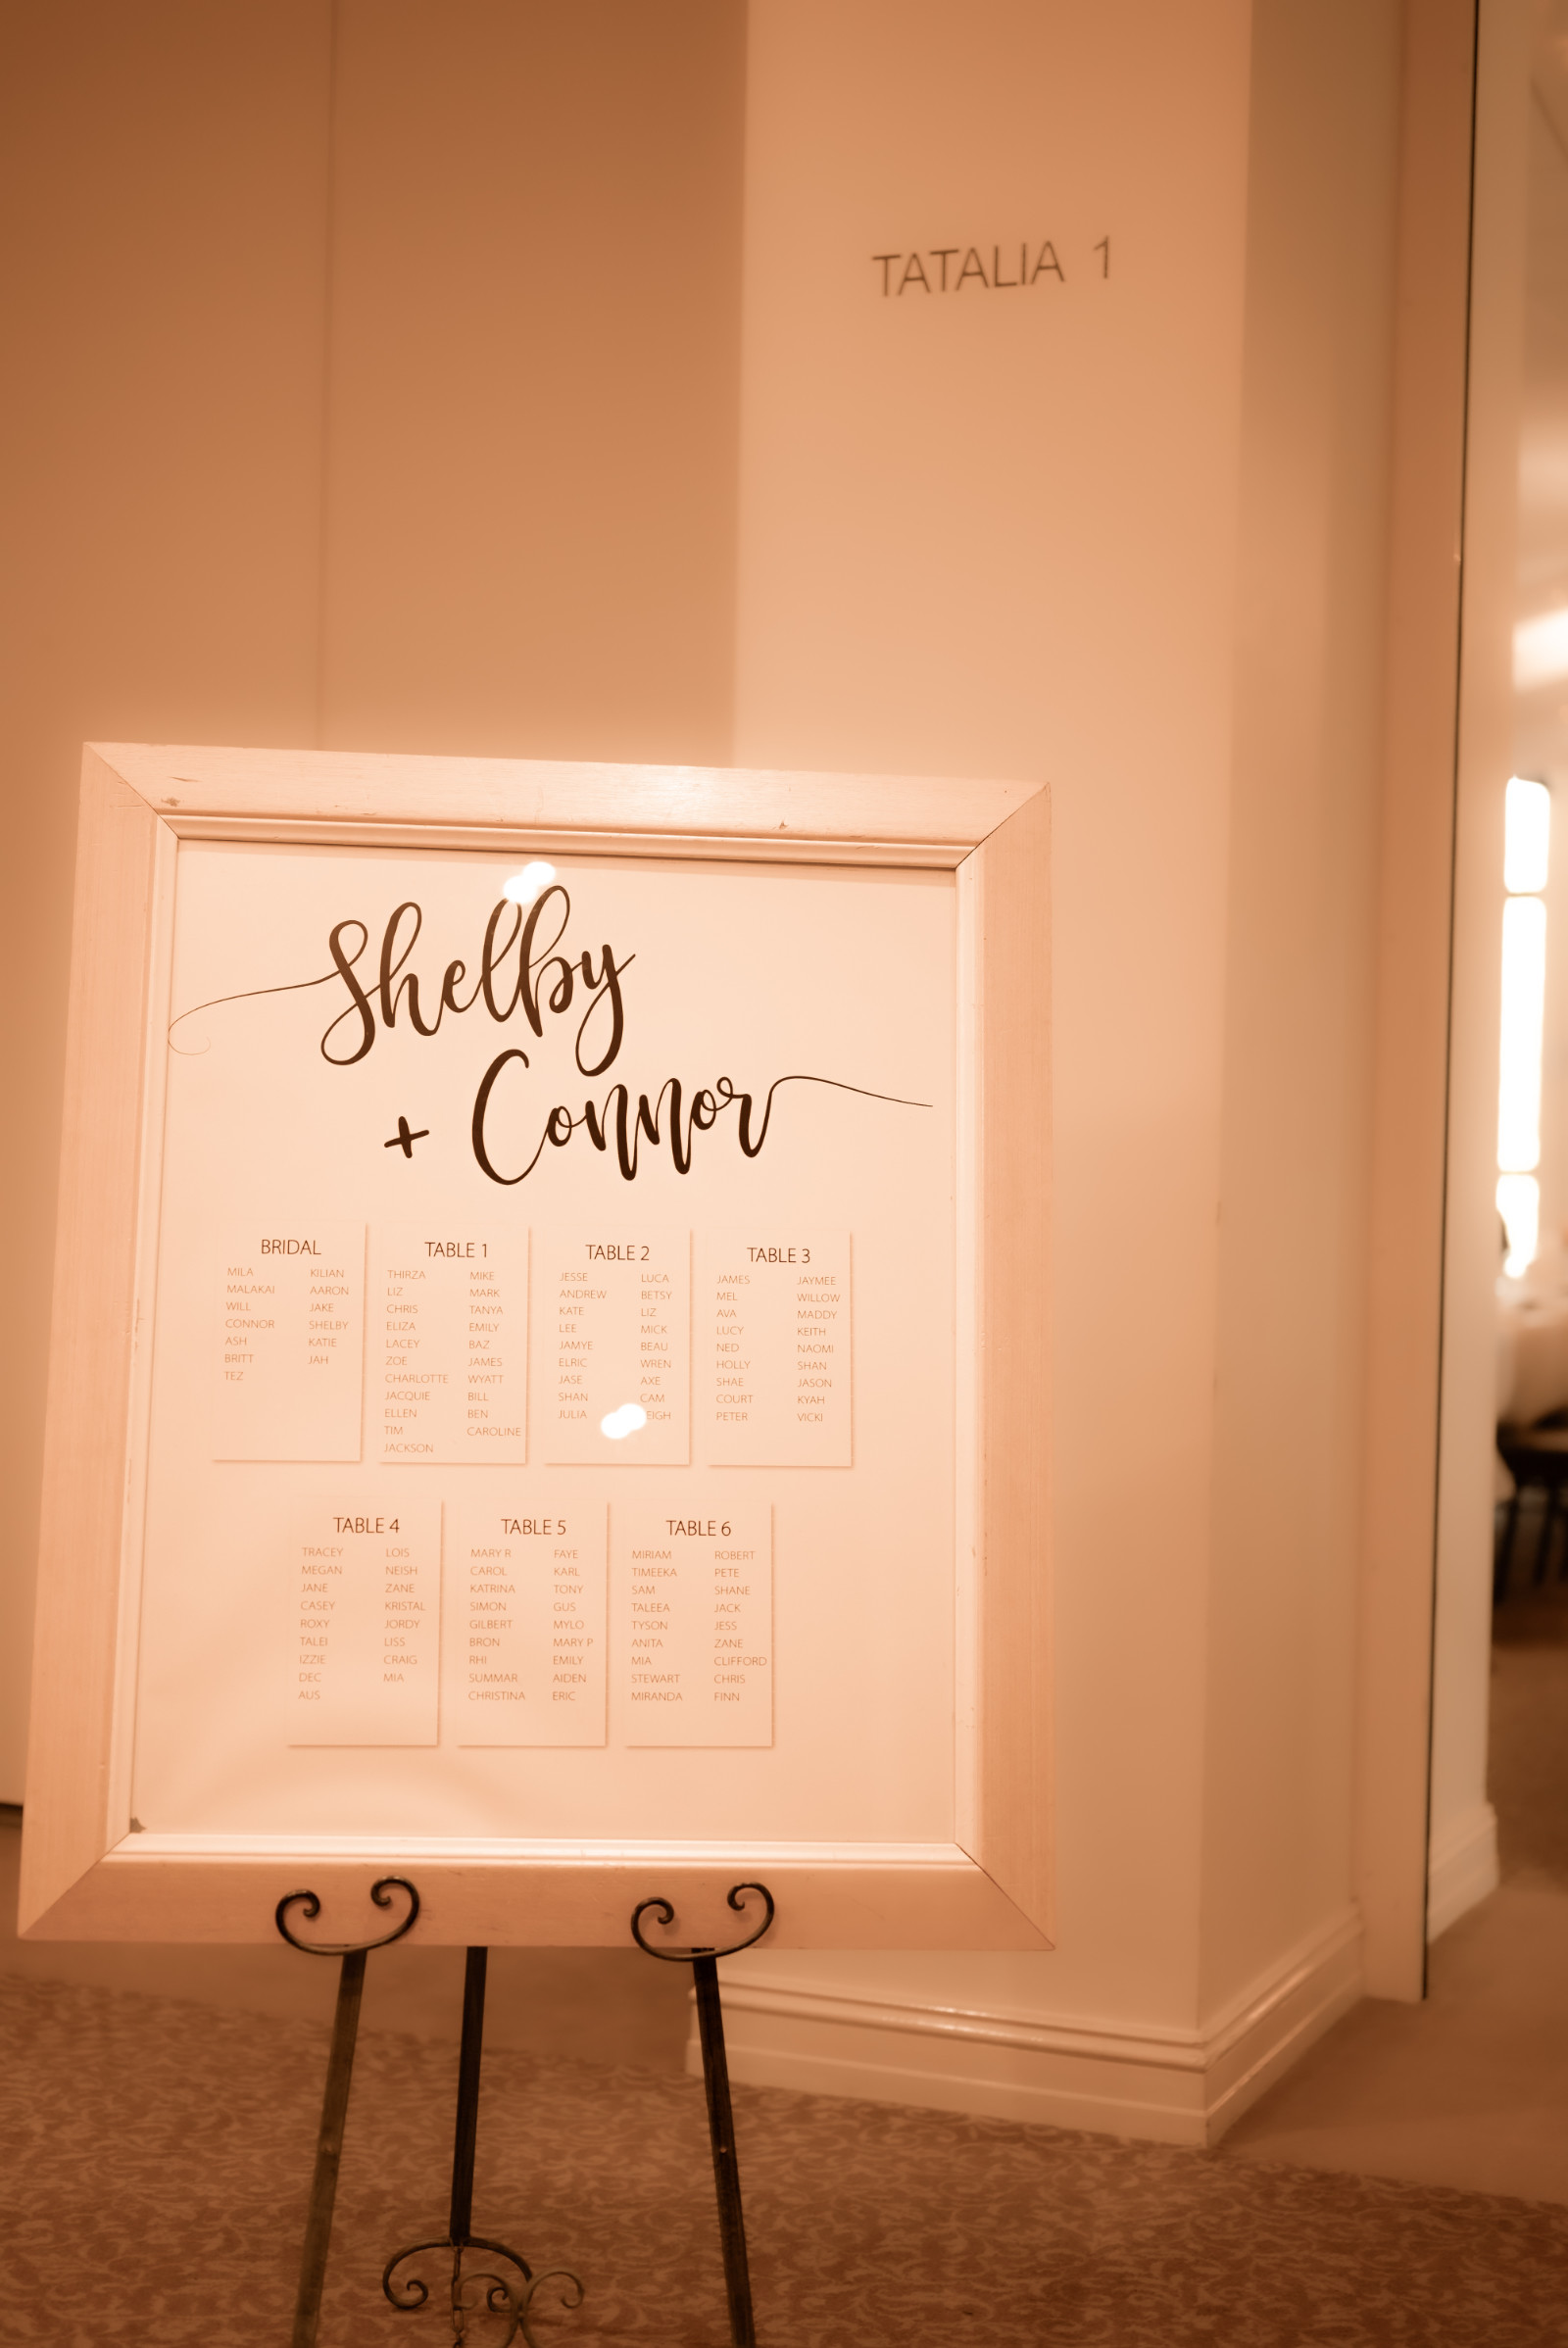 Shelby and Connor's Rich River Golf Course wedding captured by Jess Verhey Photography